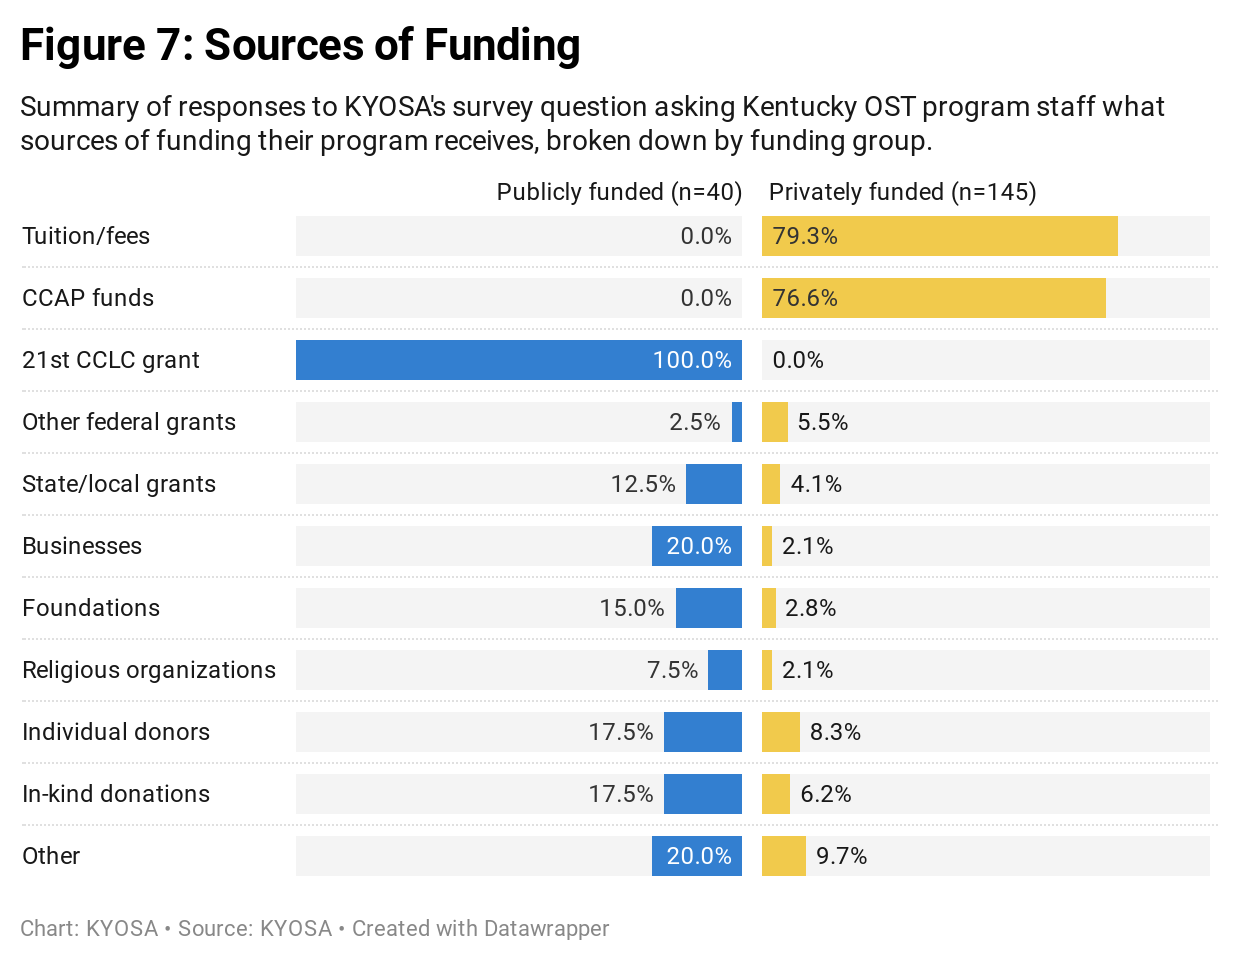 2020 OST in KY funding sources 1